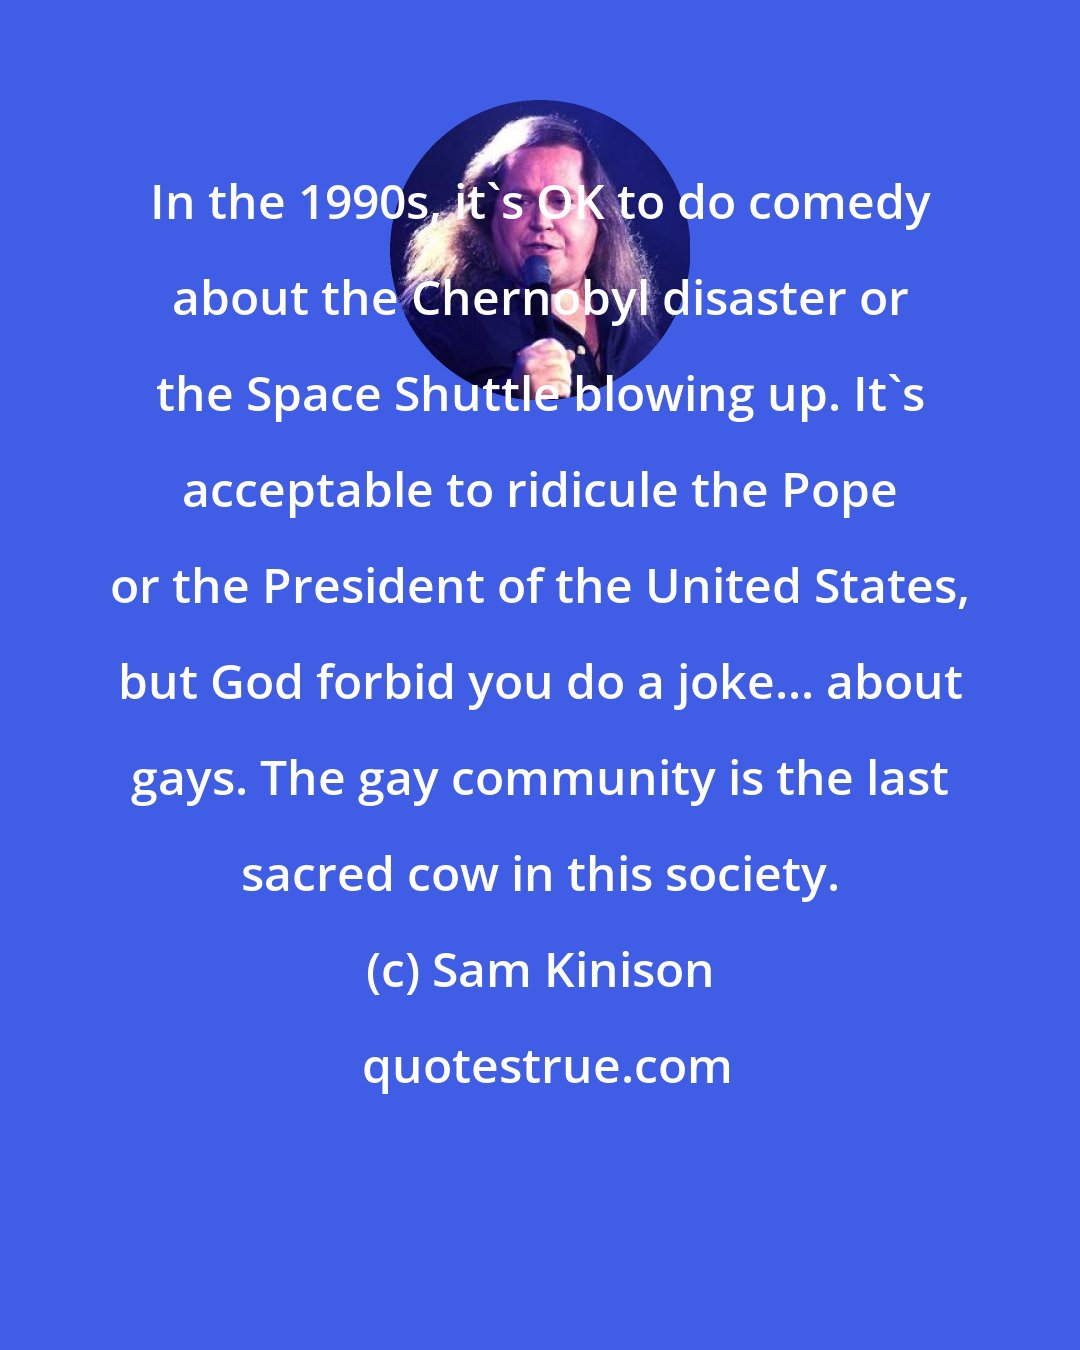 Sam Kinison: In the 1990s, it's OK to do comedy about the Chernobyl disaster or the Space Shuttle blowing up. It's acceptable to ridicule the Pope or the President of the United States, but God forbid you do a joke... about gays. The gay community is the last sacred cow in this society.